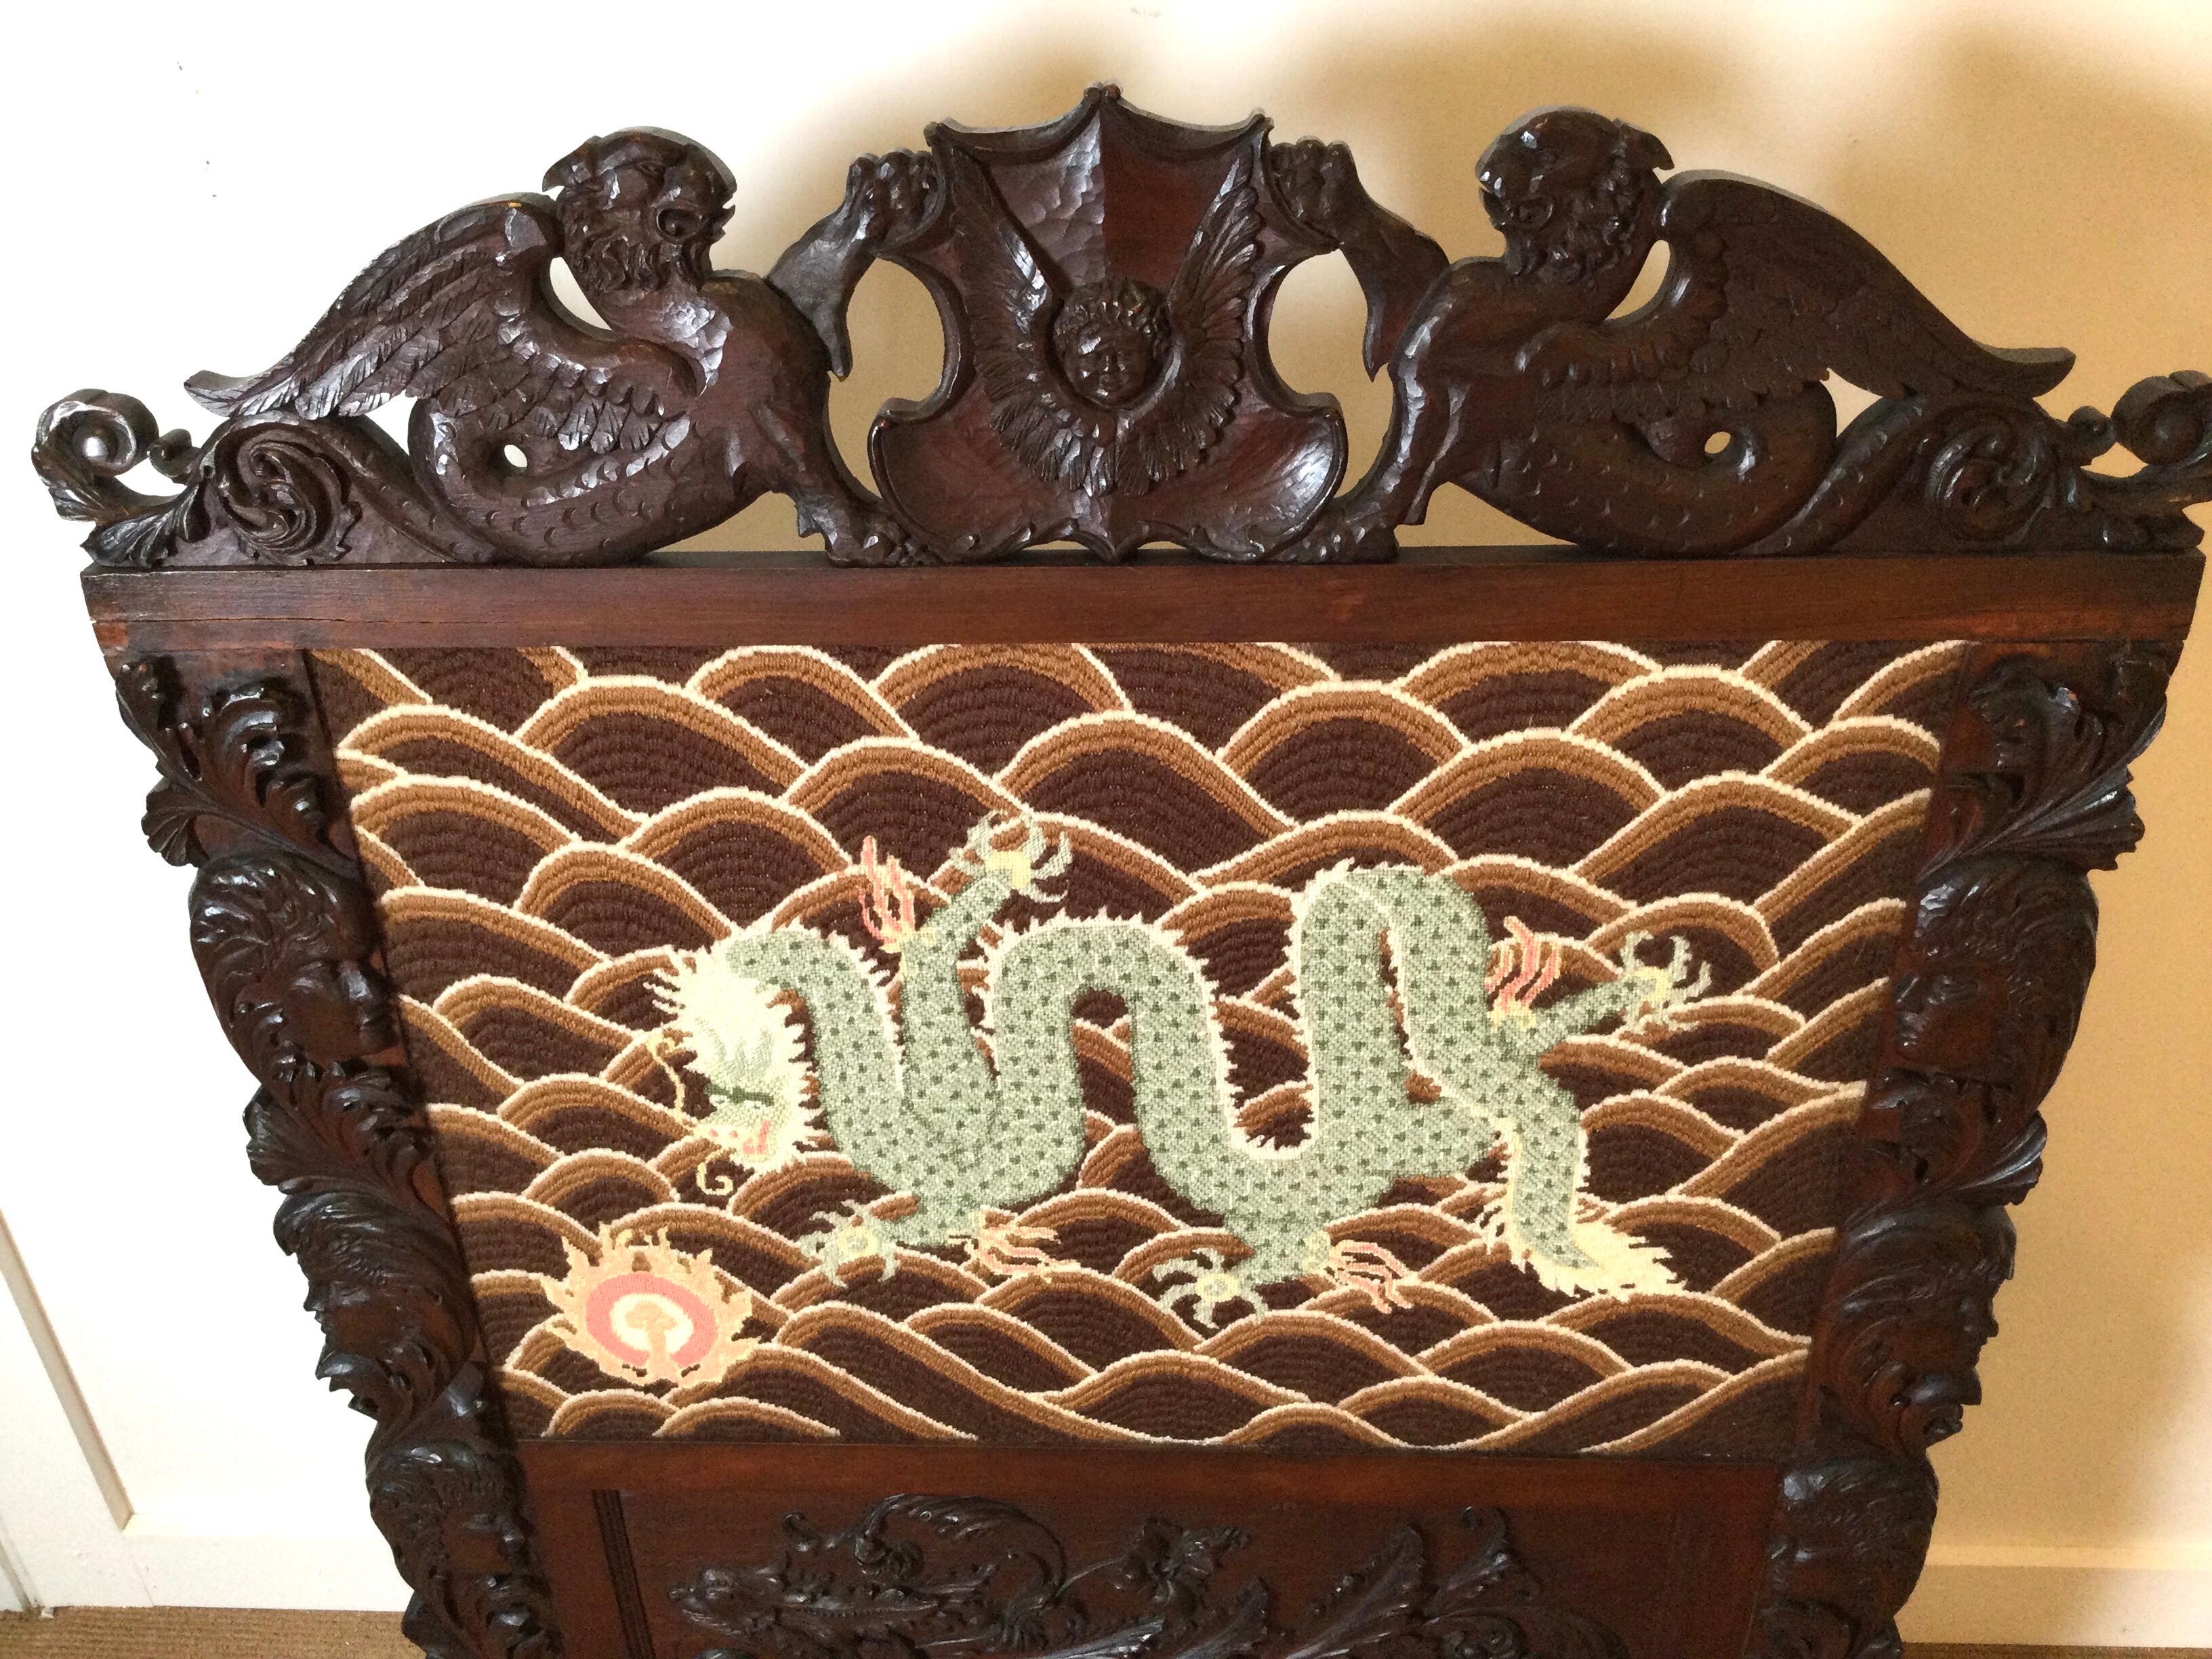 Late 19th century hand carved fire screen with needlepoint dragon motif.
Nicely carved giffins adorn the top and both sides have carved angelic faces.
All four carved paw foot support the screen.
Dimensions: 35.50